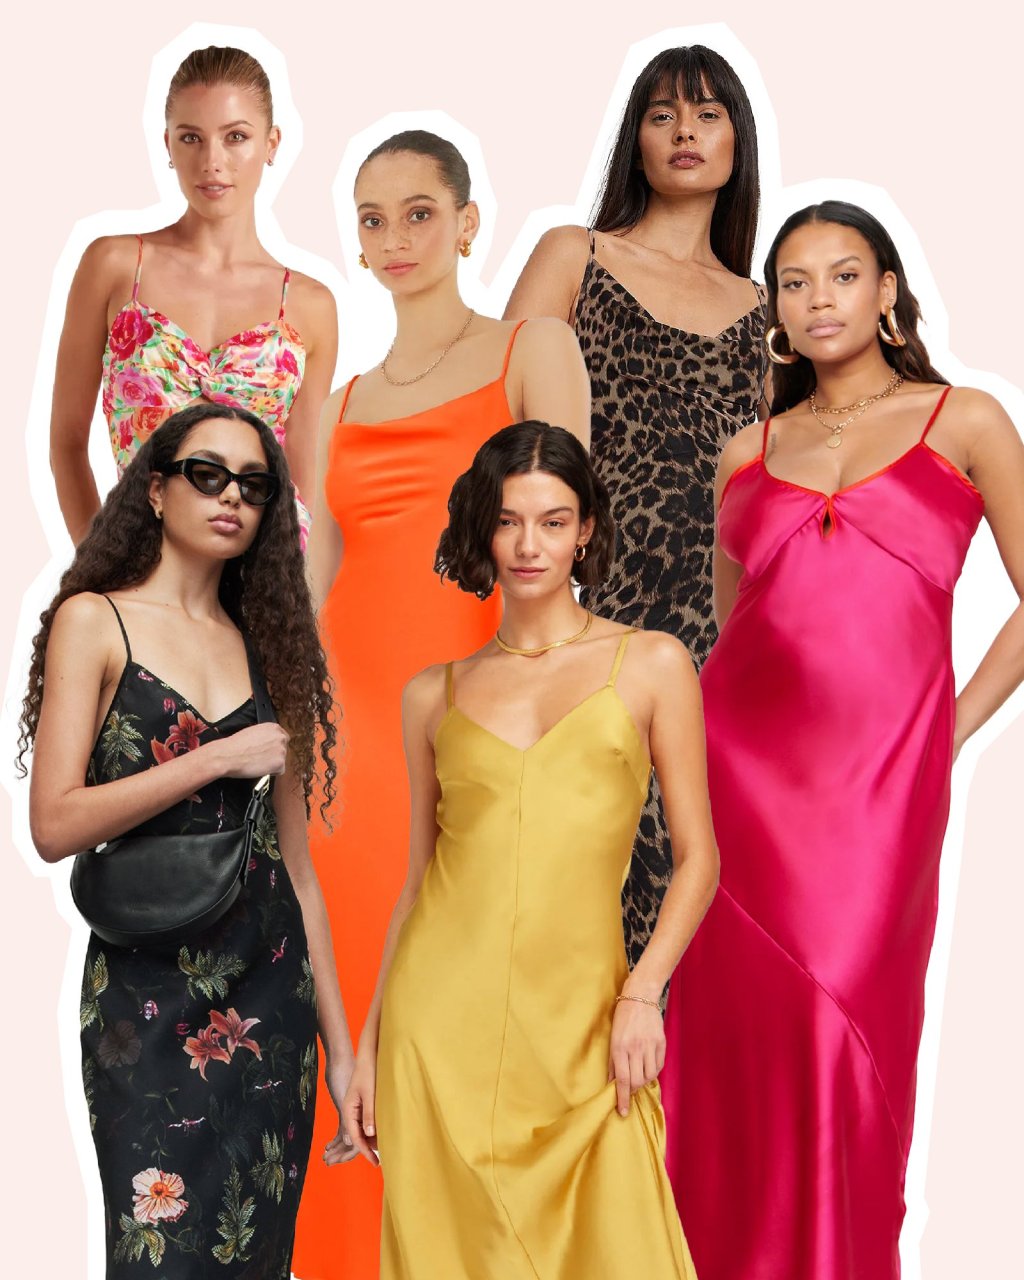 Slip Dress Outfit Ideas For The Most Stylish Slips On The High